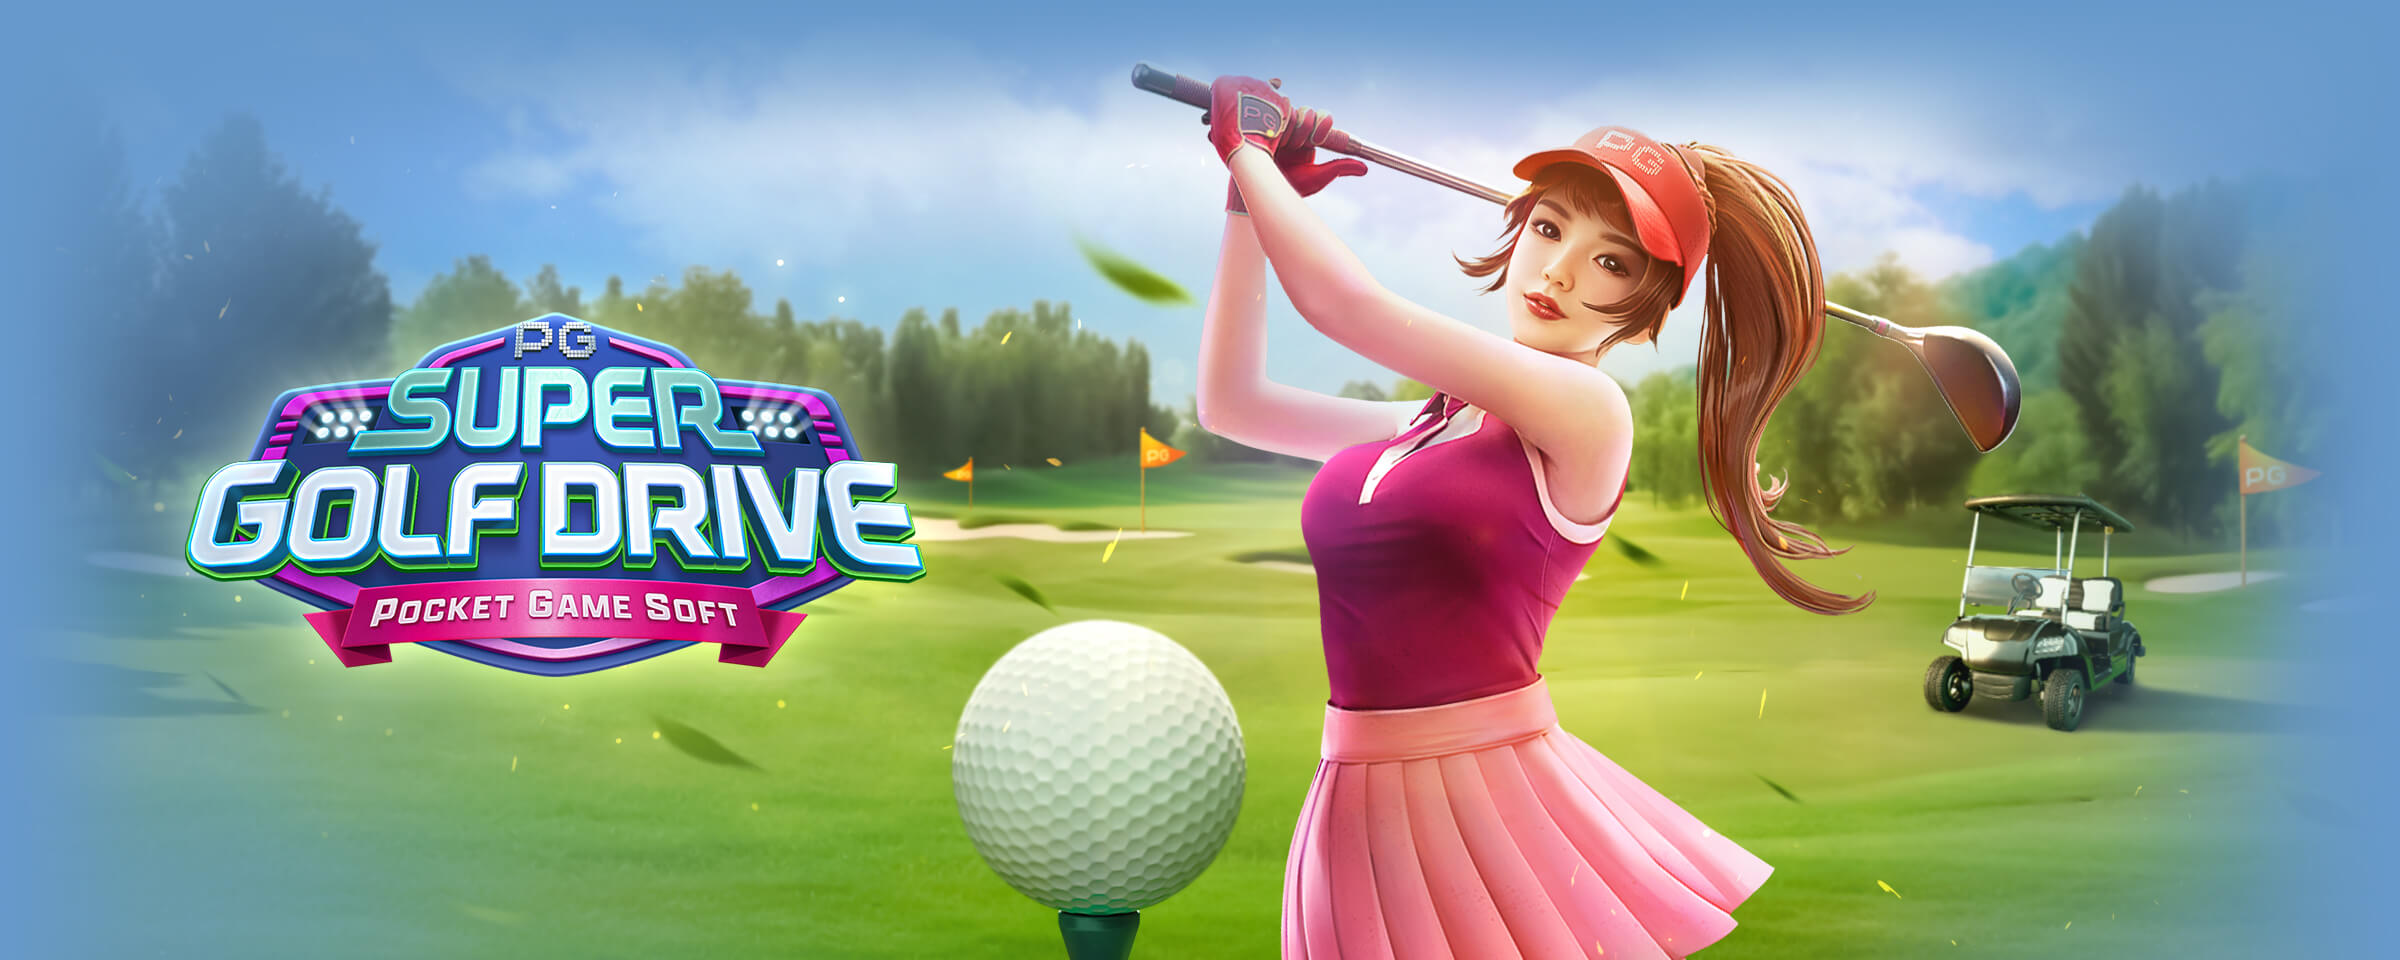 SHOW OFF YOUR GOLF SKILLS IN “SUPER GOLF DRIVE”!